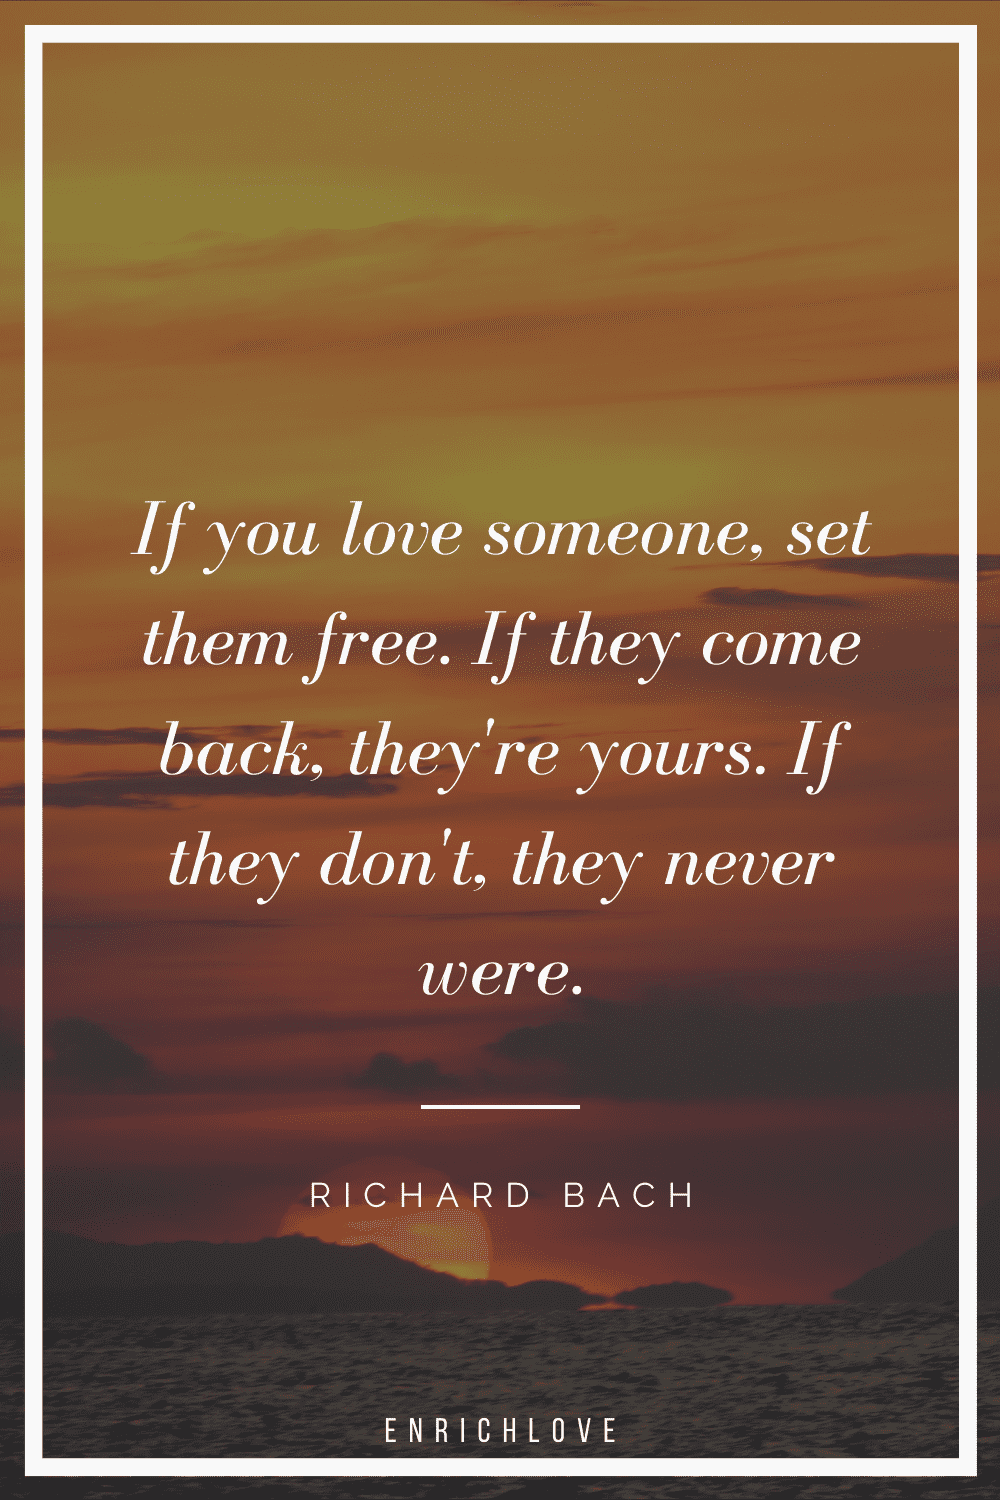 If you love someone, set them free. If they come back, they're yours. If they don't, they never were.